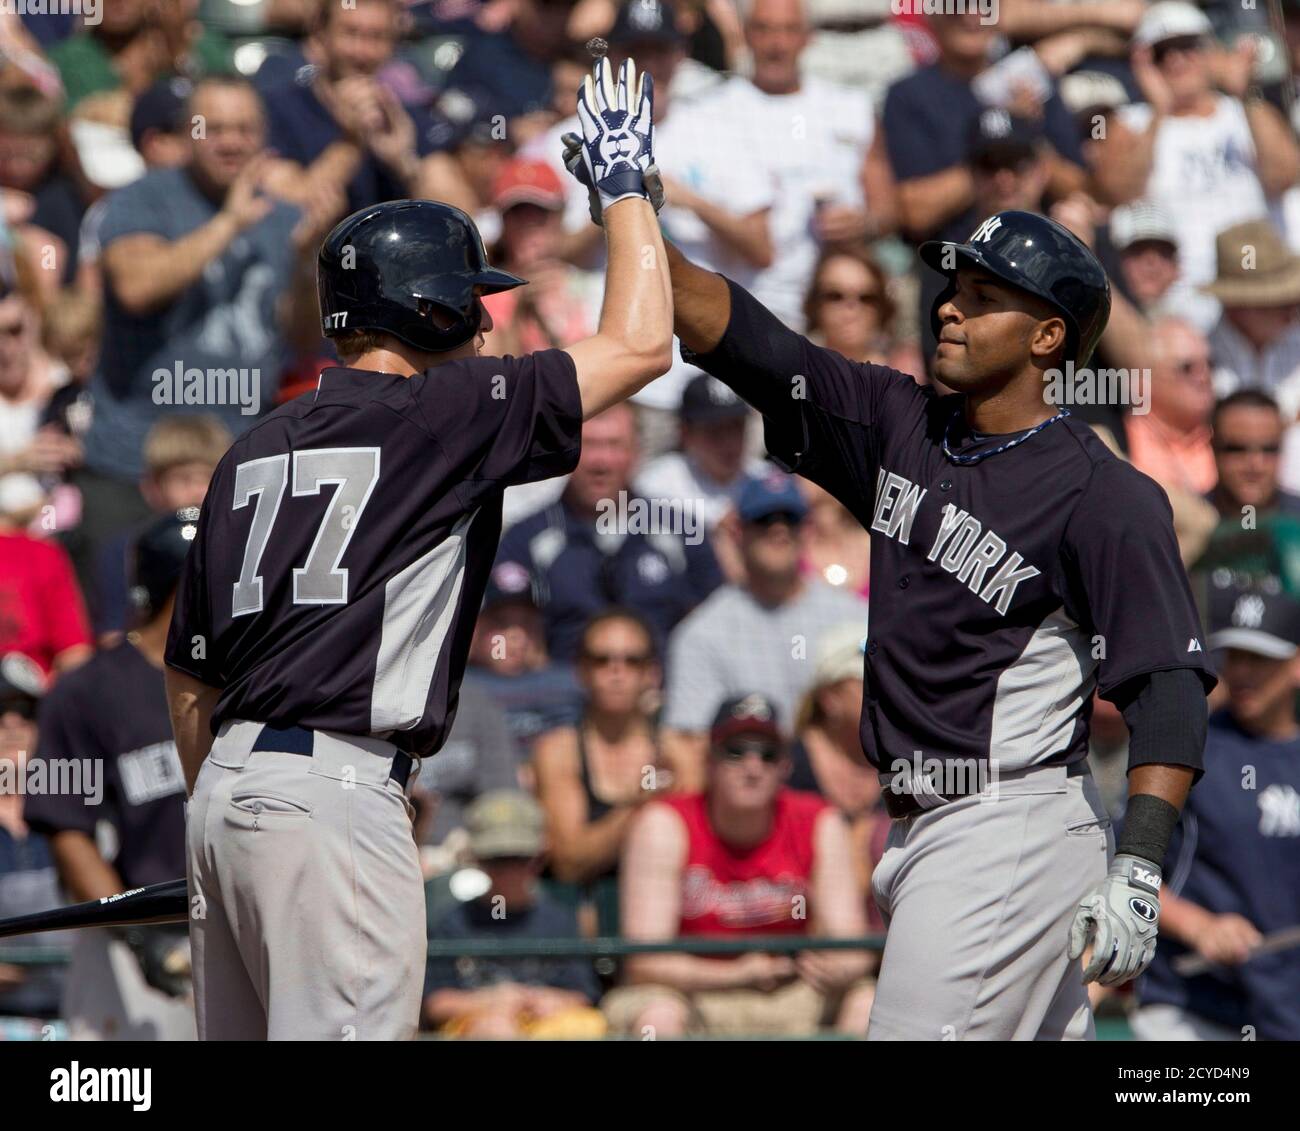 New York Yankees' Zoilo Almonte (R) celebrates his home run with teammate Corban Joseph during the third inning of their MLB spring training game against the Atlanta Braves in Lake Buena Vista, Florida, February 23, 2013. REUTERS/Scott Audette   (UNITED STATES - Tags: SPORT BASEBALL) Stock Photo